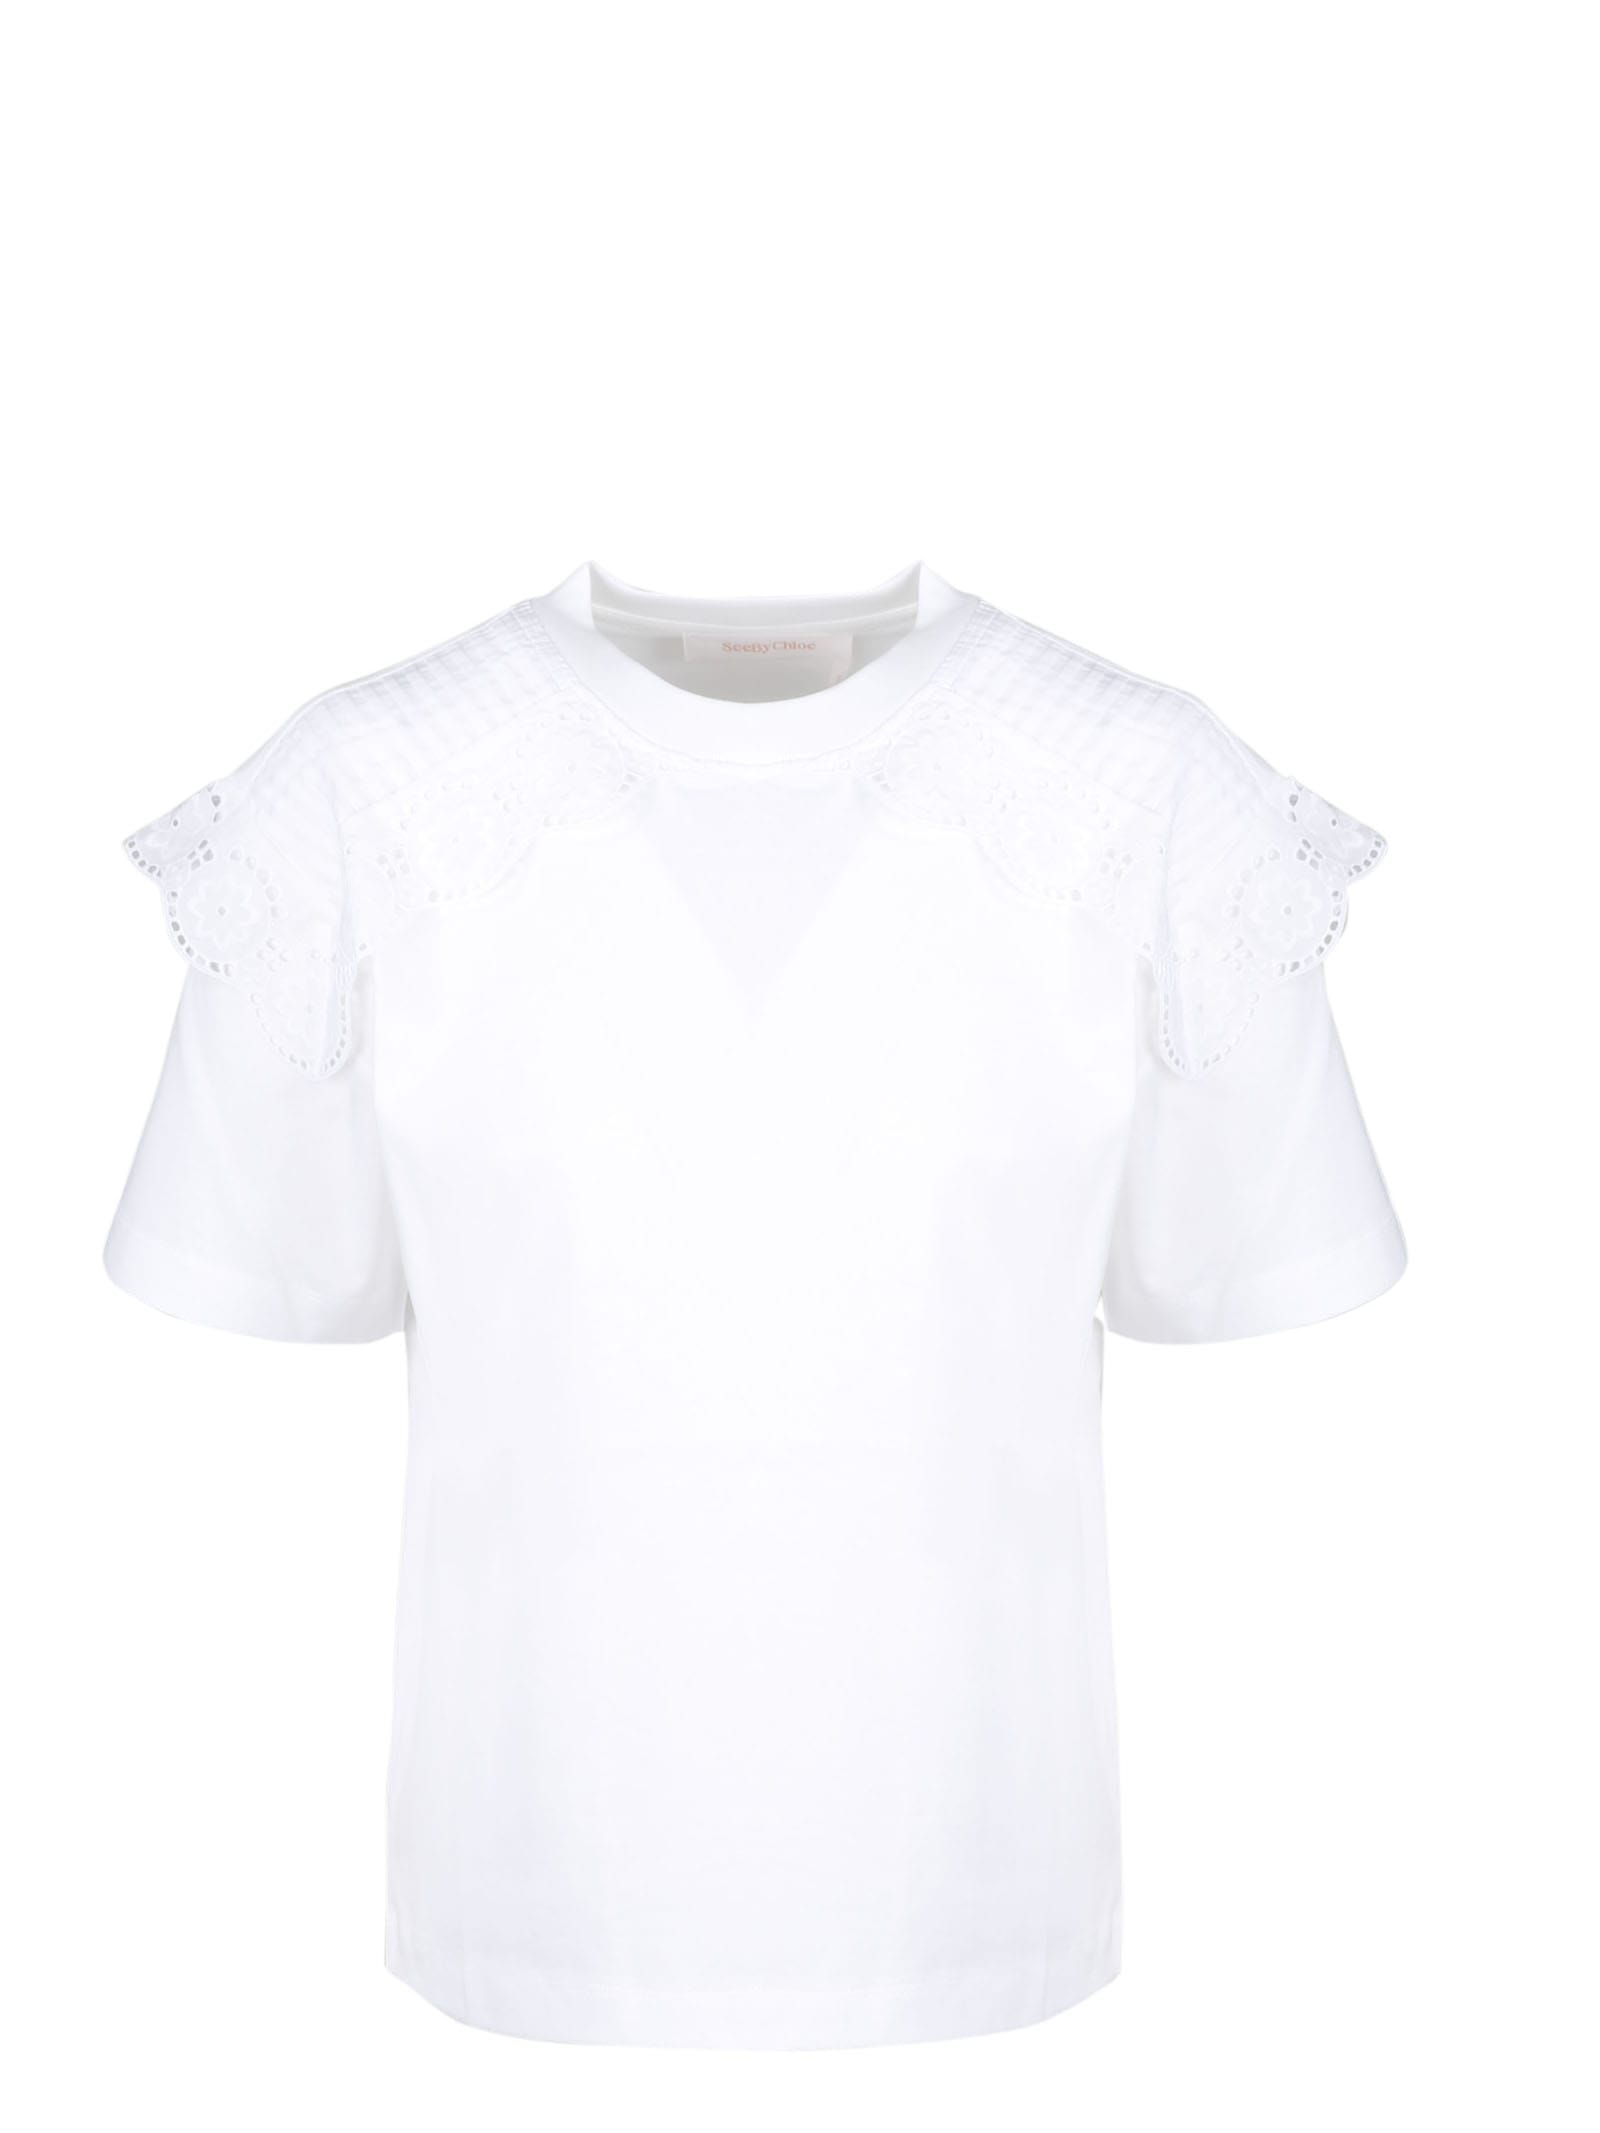 See by Chloé Emboidered Scallop T-shirt